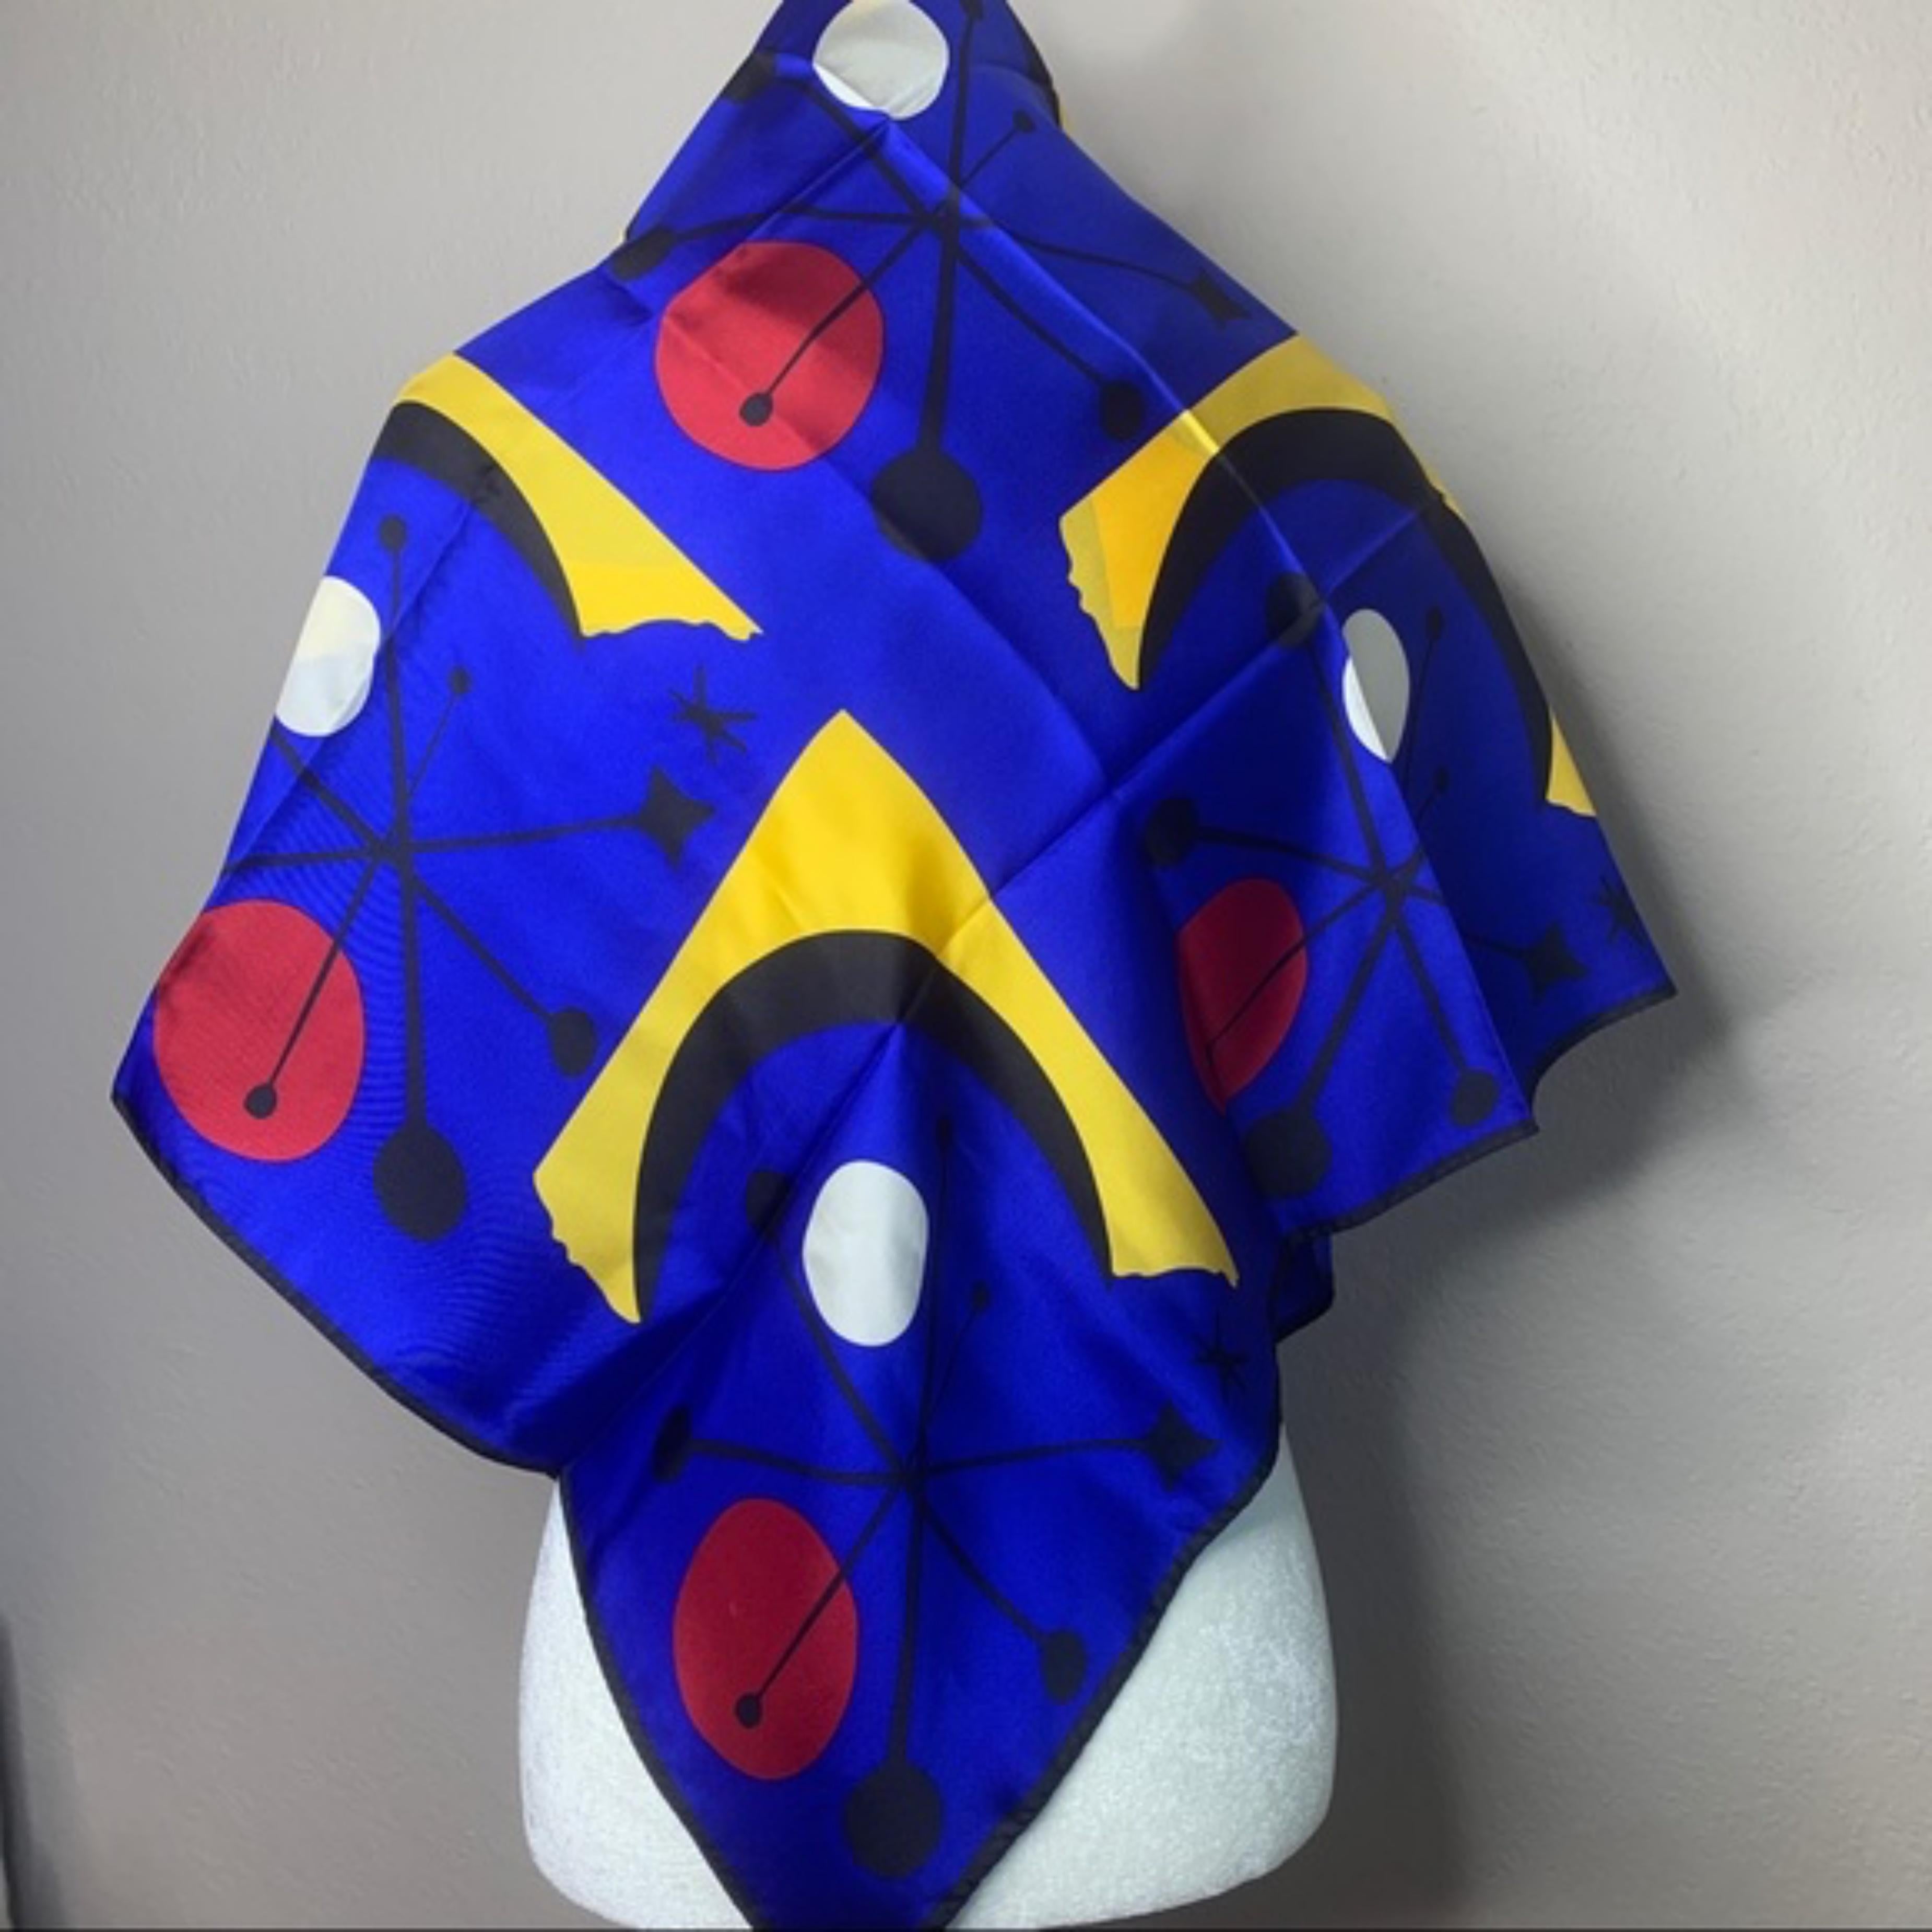 Alexander Calder Abstract Print - Paper Ball Silks Scarf - artist designed textile - 33 inches x 35 inches